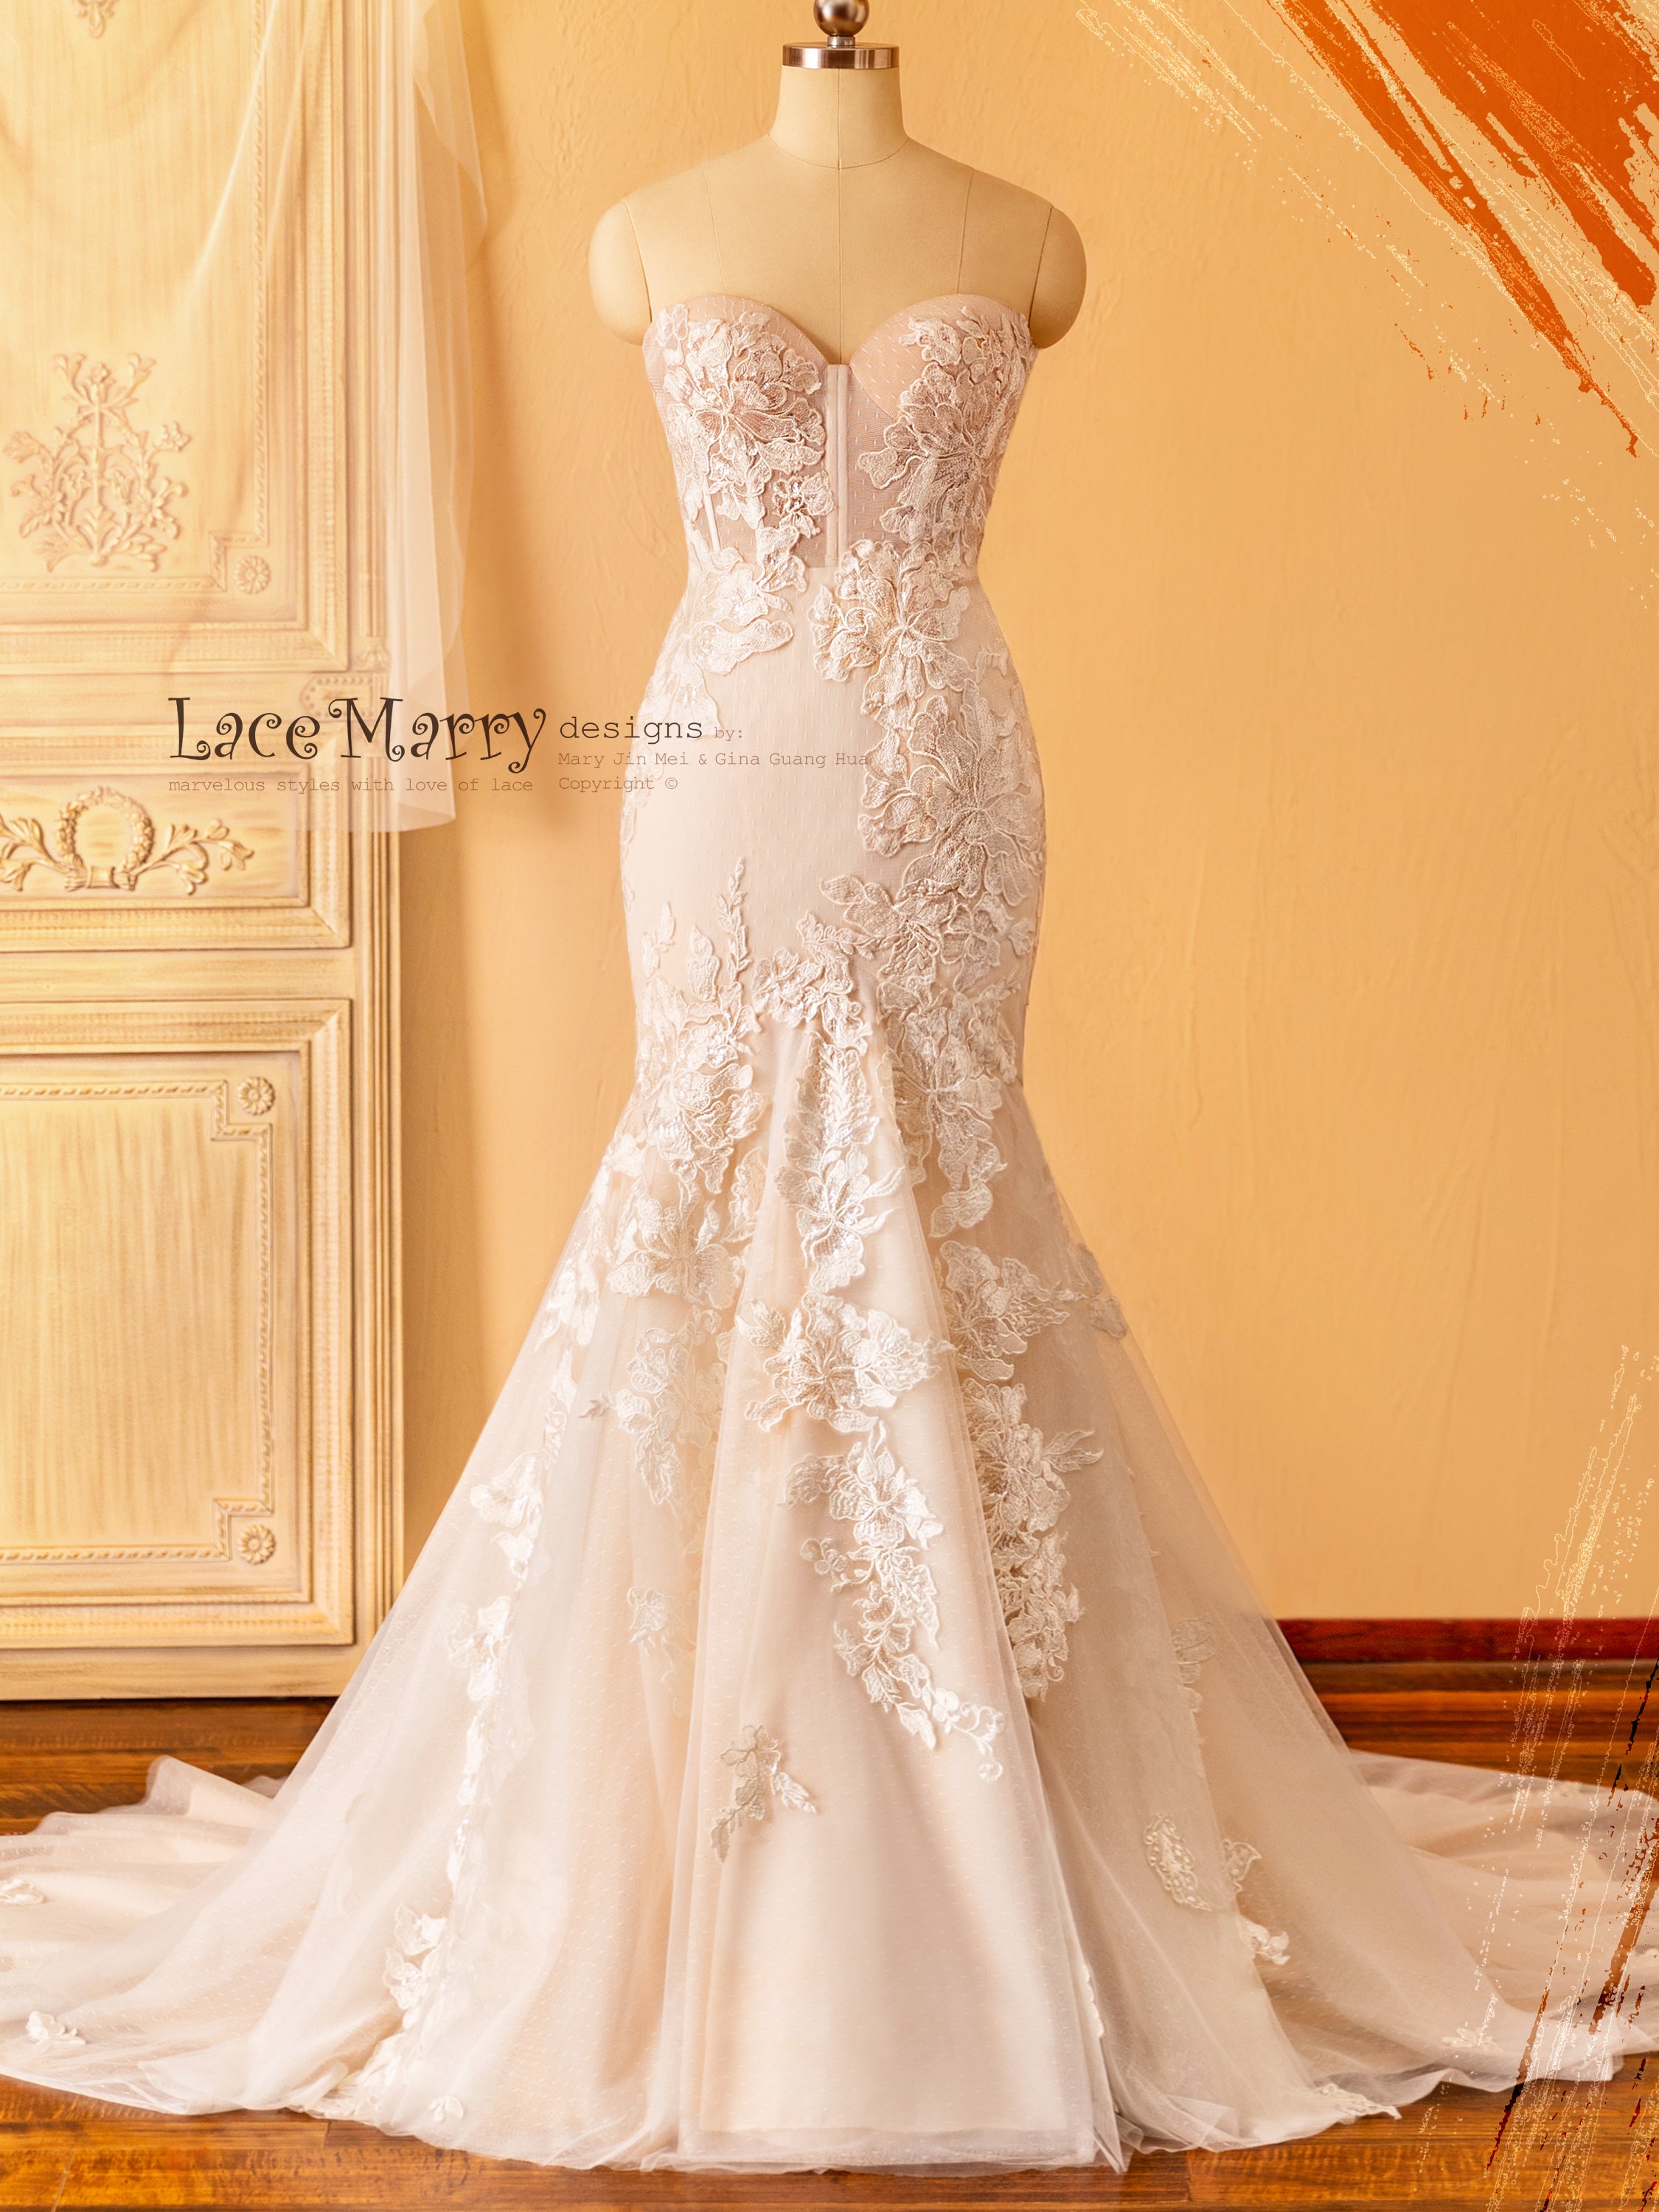 Strapless Fitted Wedding Dress in Boned and Push up Neckline - LaceMarry